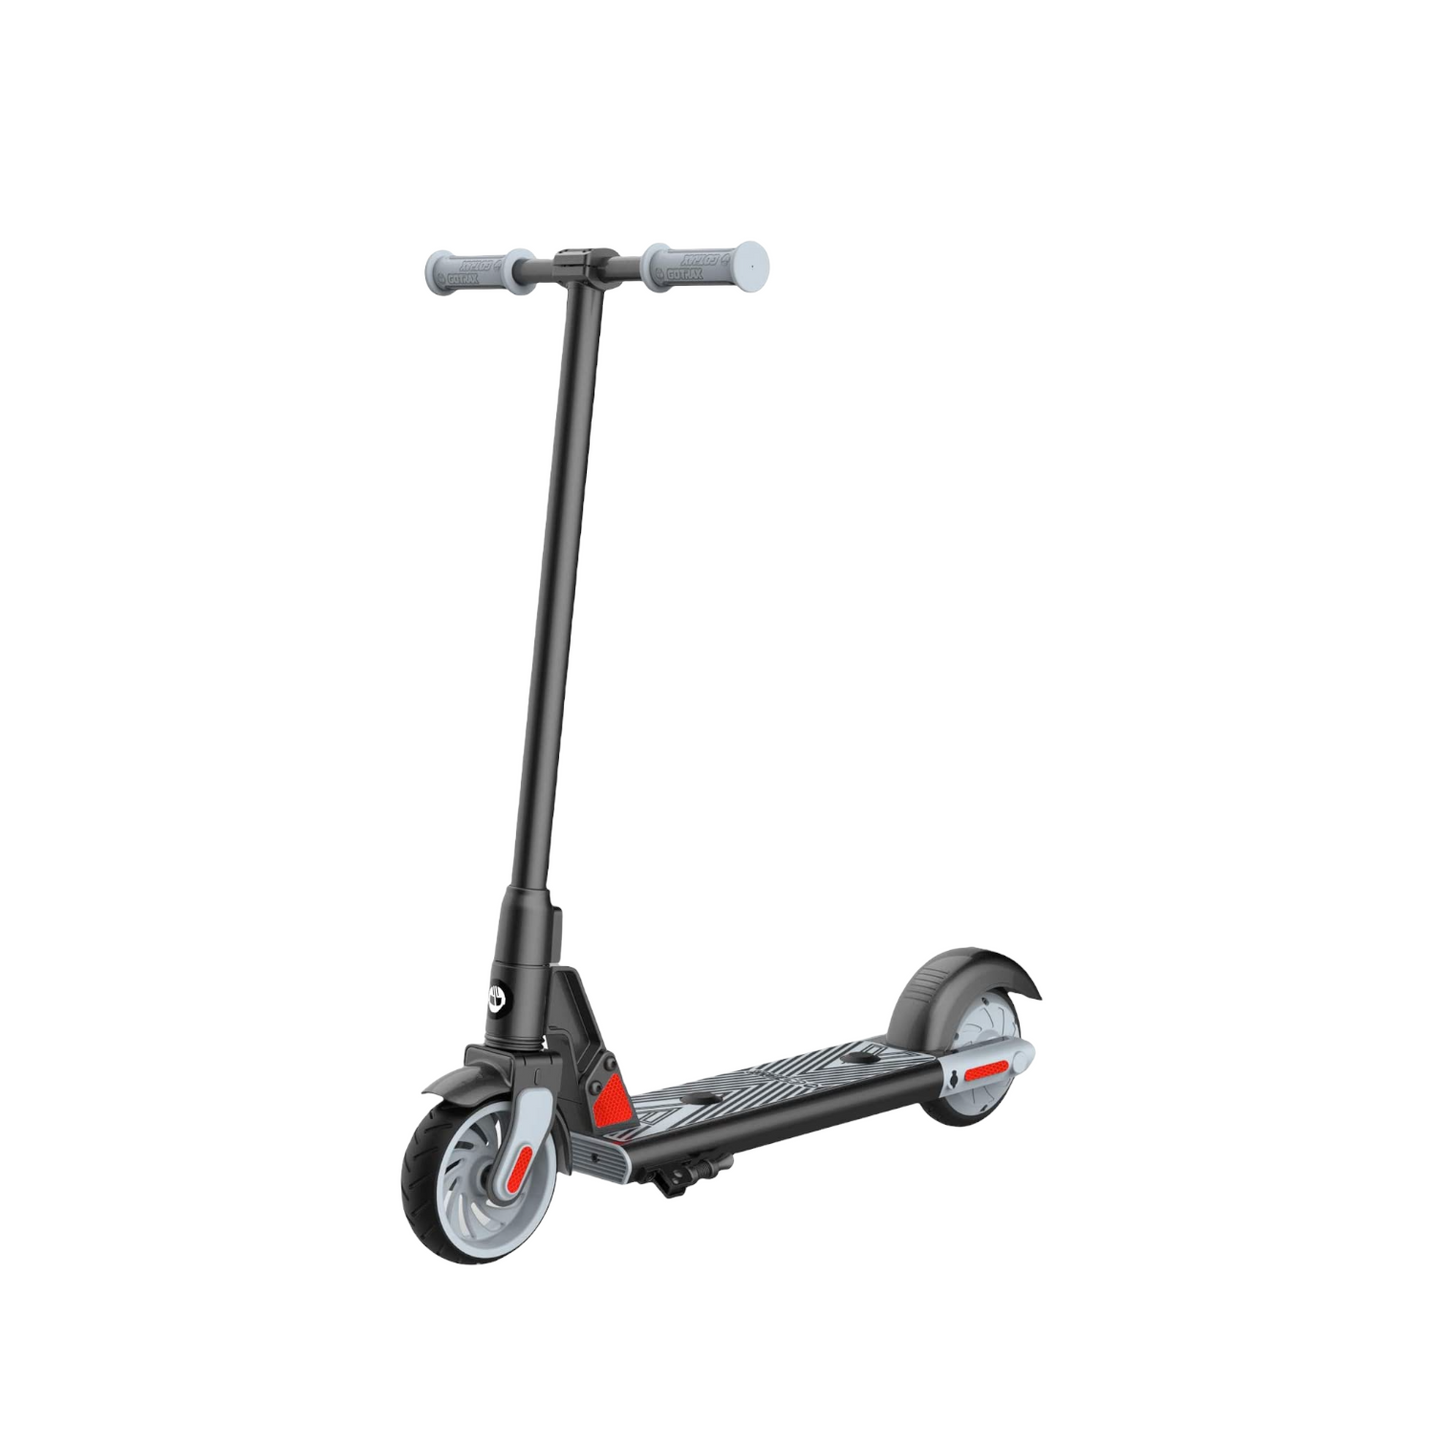 Gotrax GKS Electric Scooter for Kids Age of 6-12, Kick-Start Boost and Gravity Sensor Kids Electric Scooter